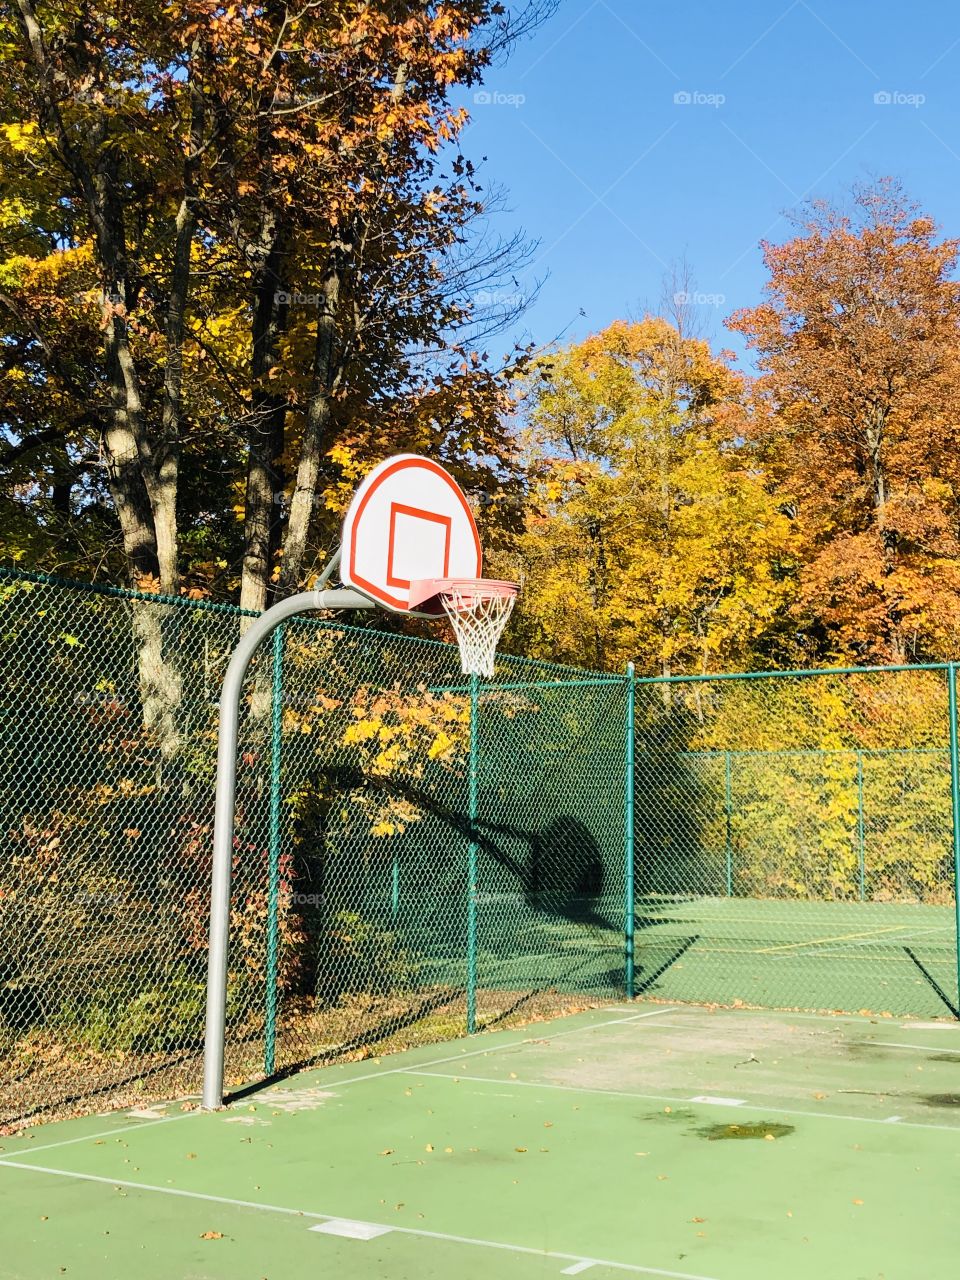 Outdoor basketball court on a fabulous fall afternoon in Wisconsin.